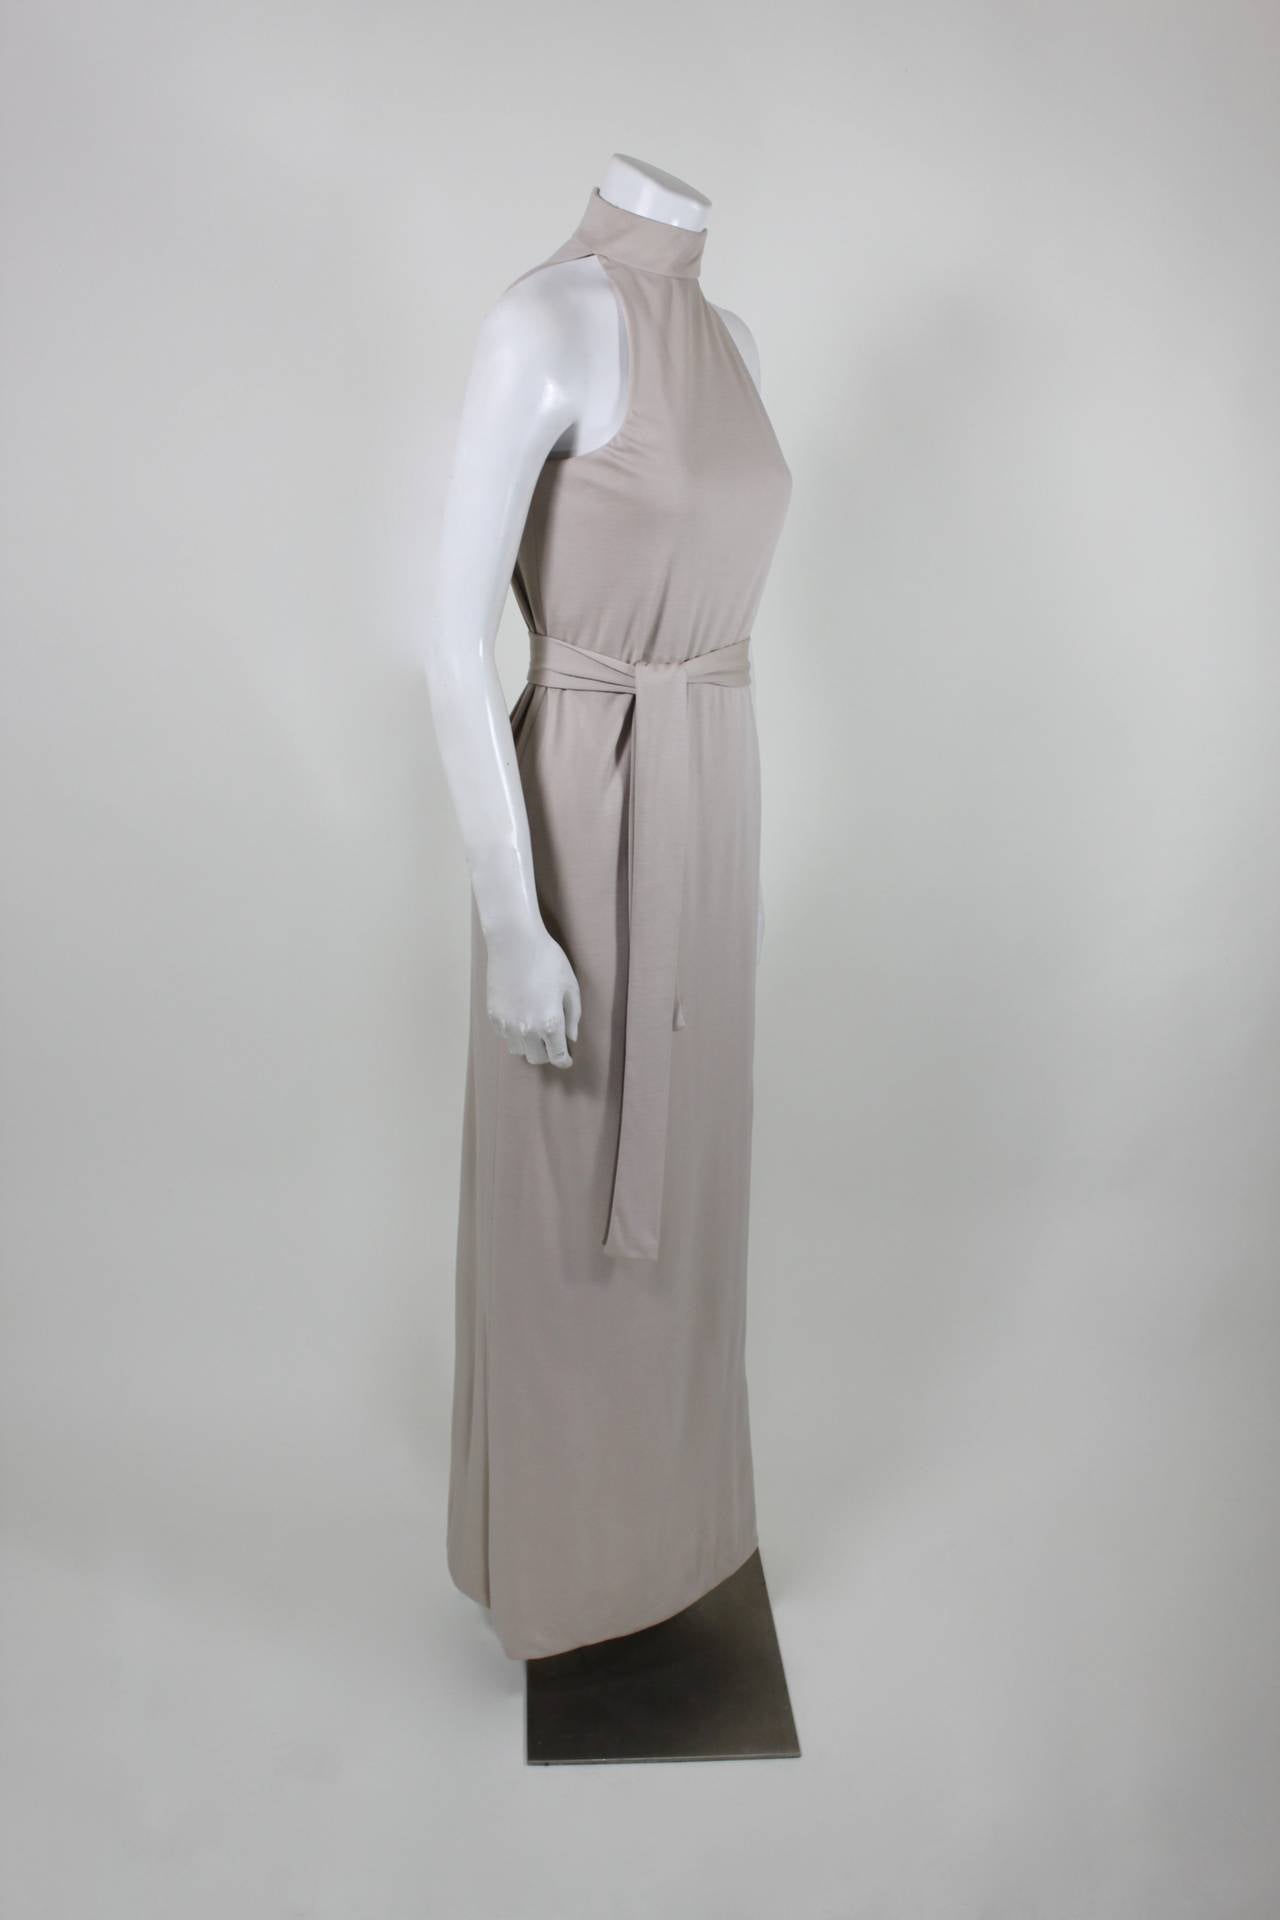 Women's Norman Norell 1970s Cream Wool Evening Gown For Sale